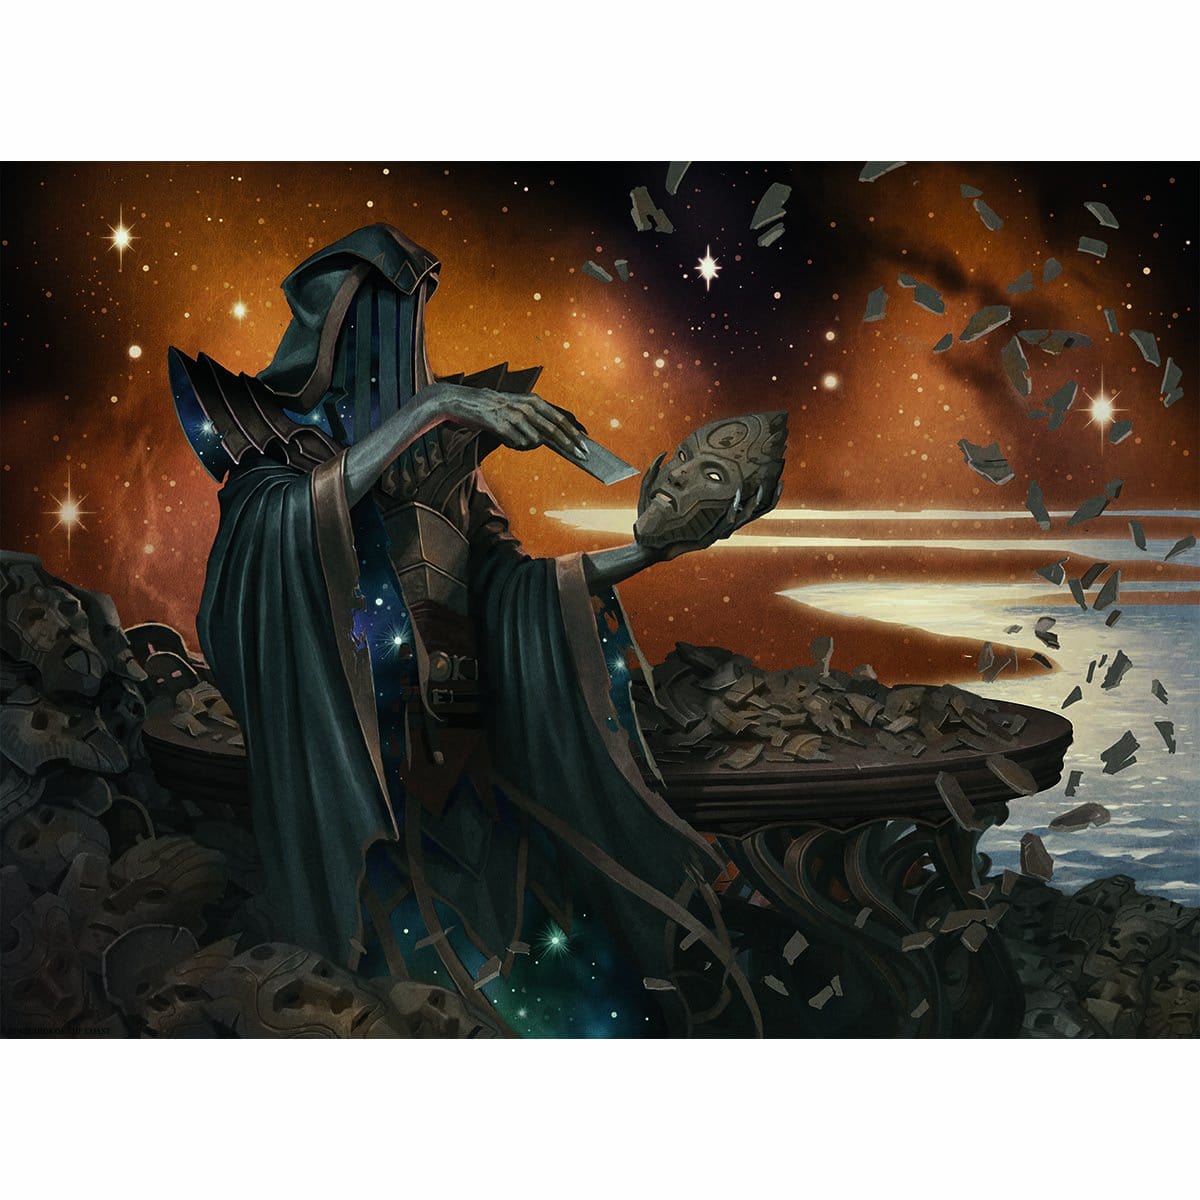 MTG Artist Proof - Underworld Dreams by Pindurski, in Hello, It's You's  Artist Proofs - Sketched Comic Art Gallery Room